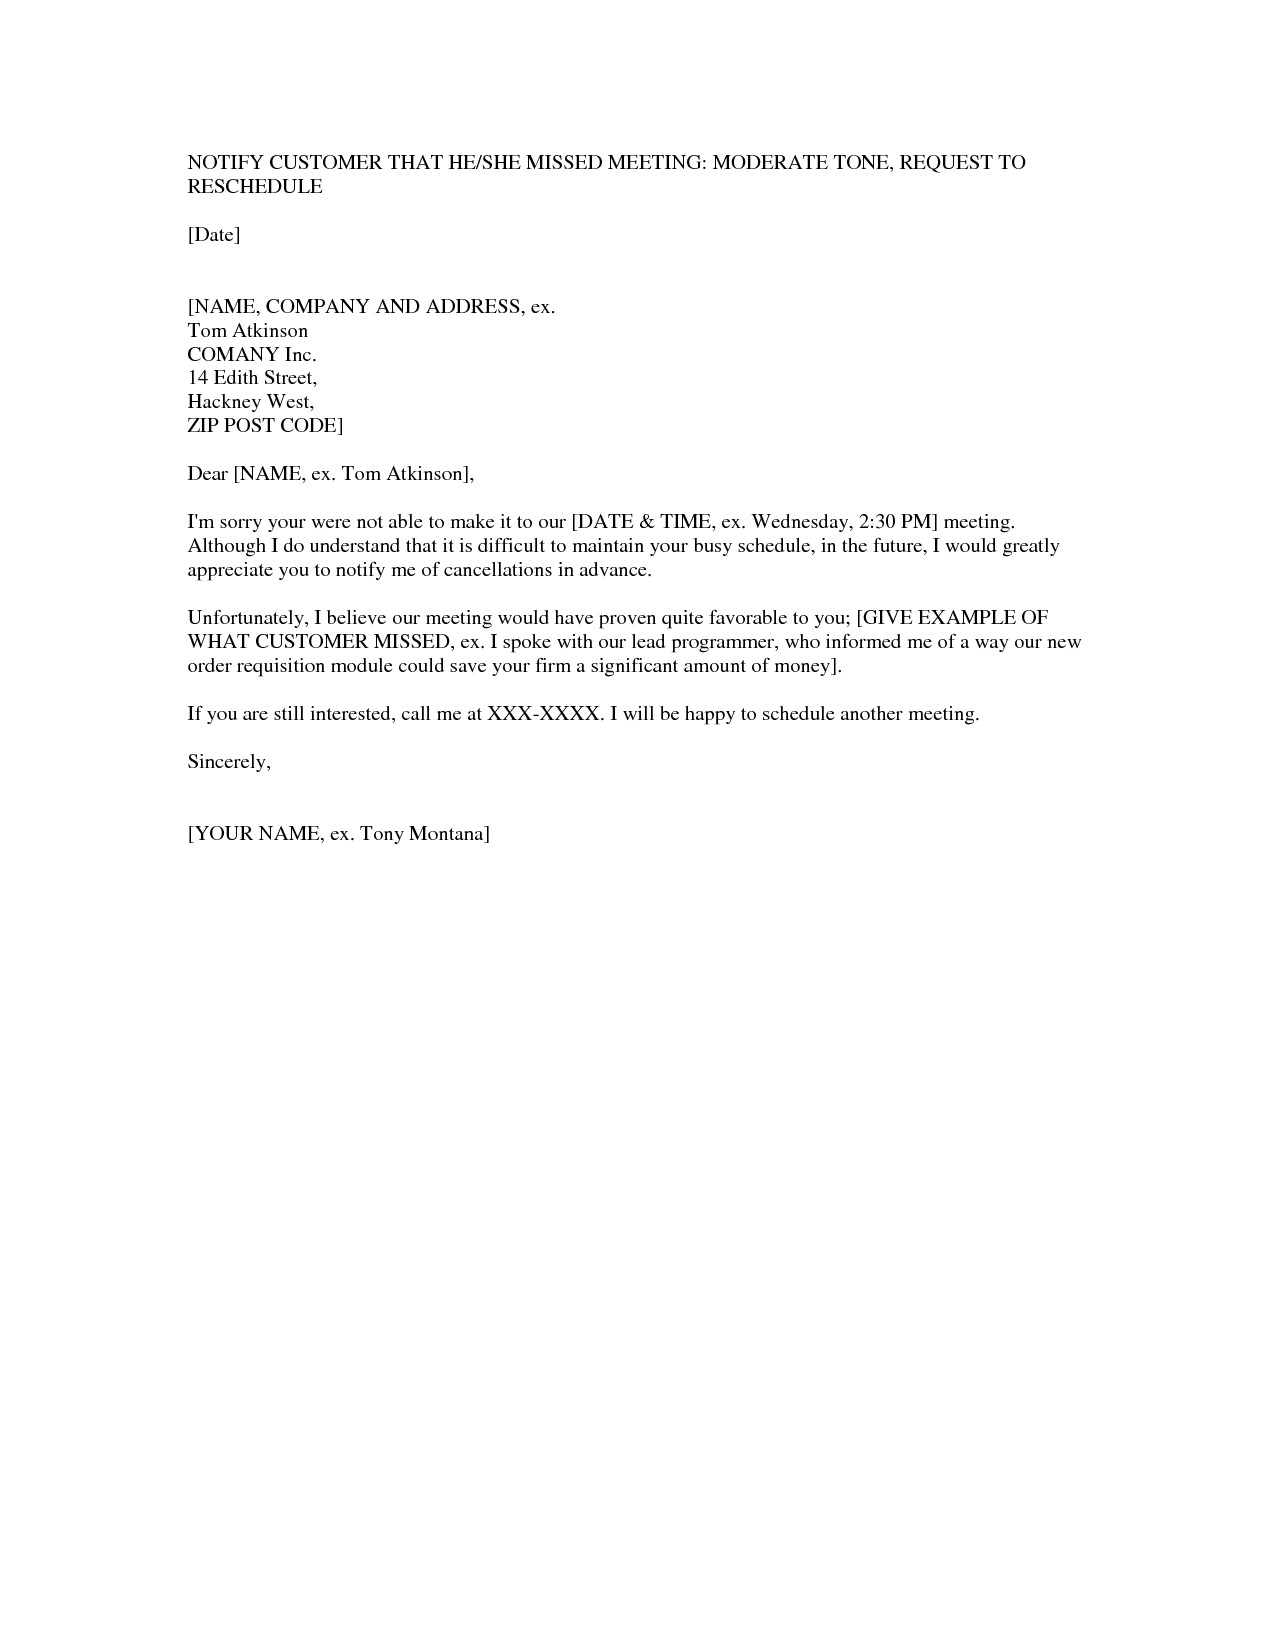 sample letter to reschedule a meeting